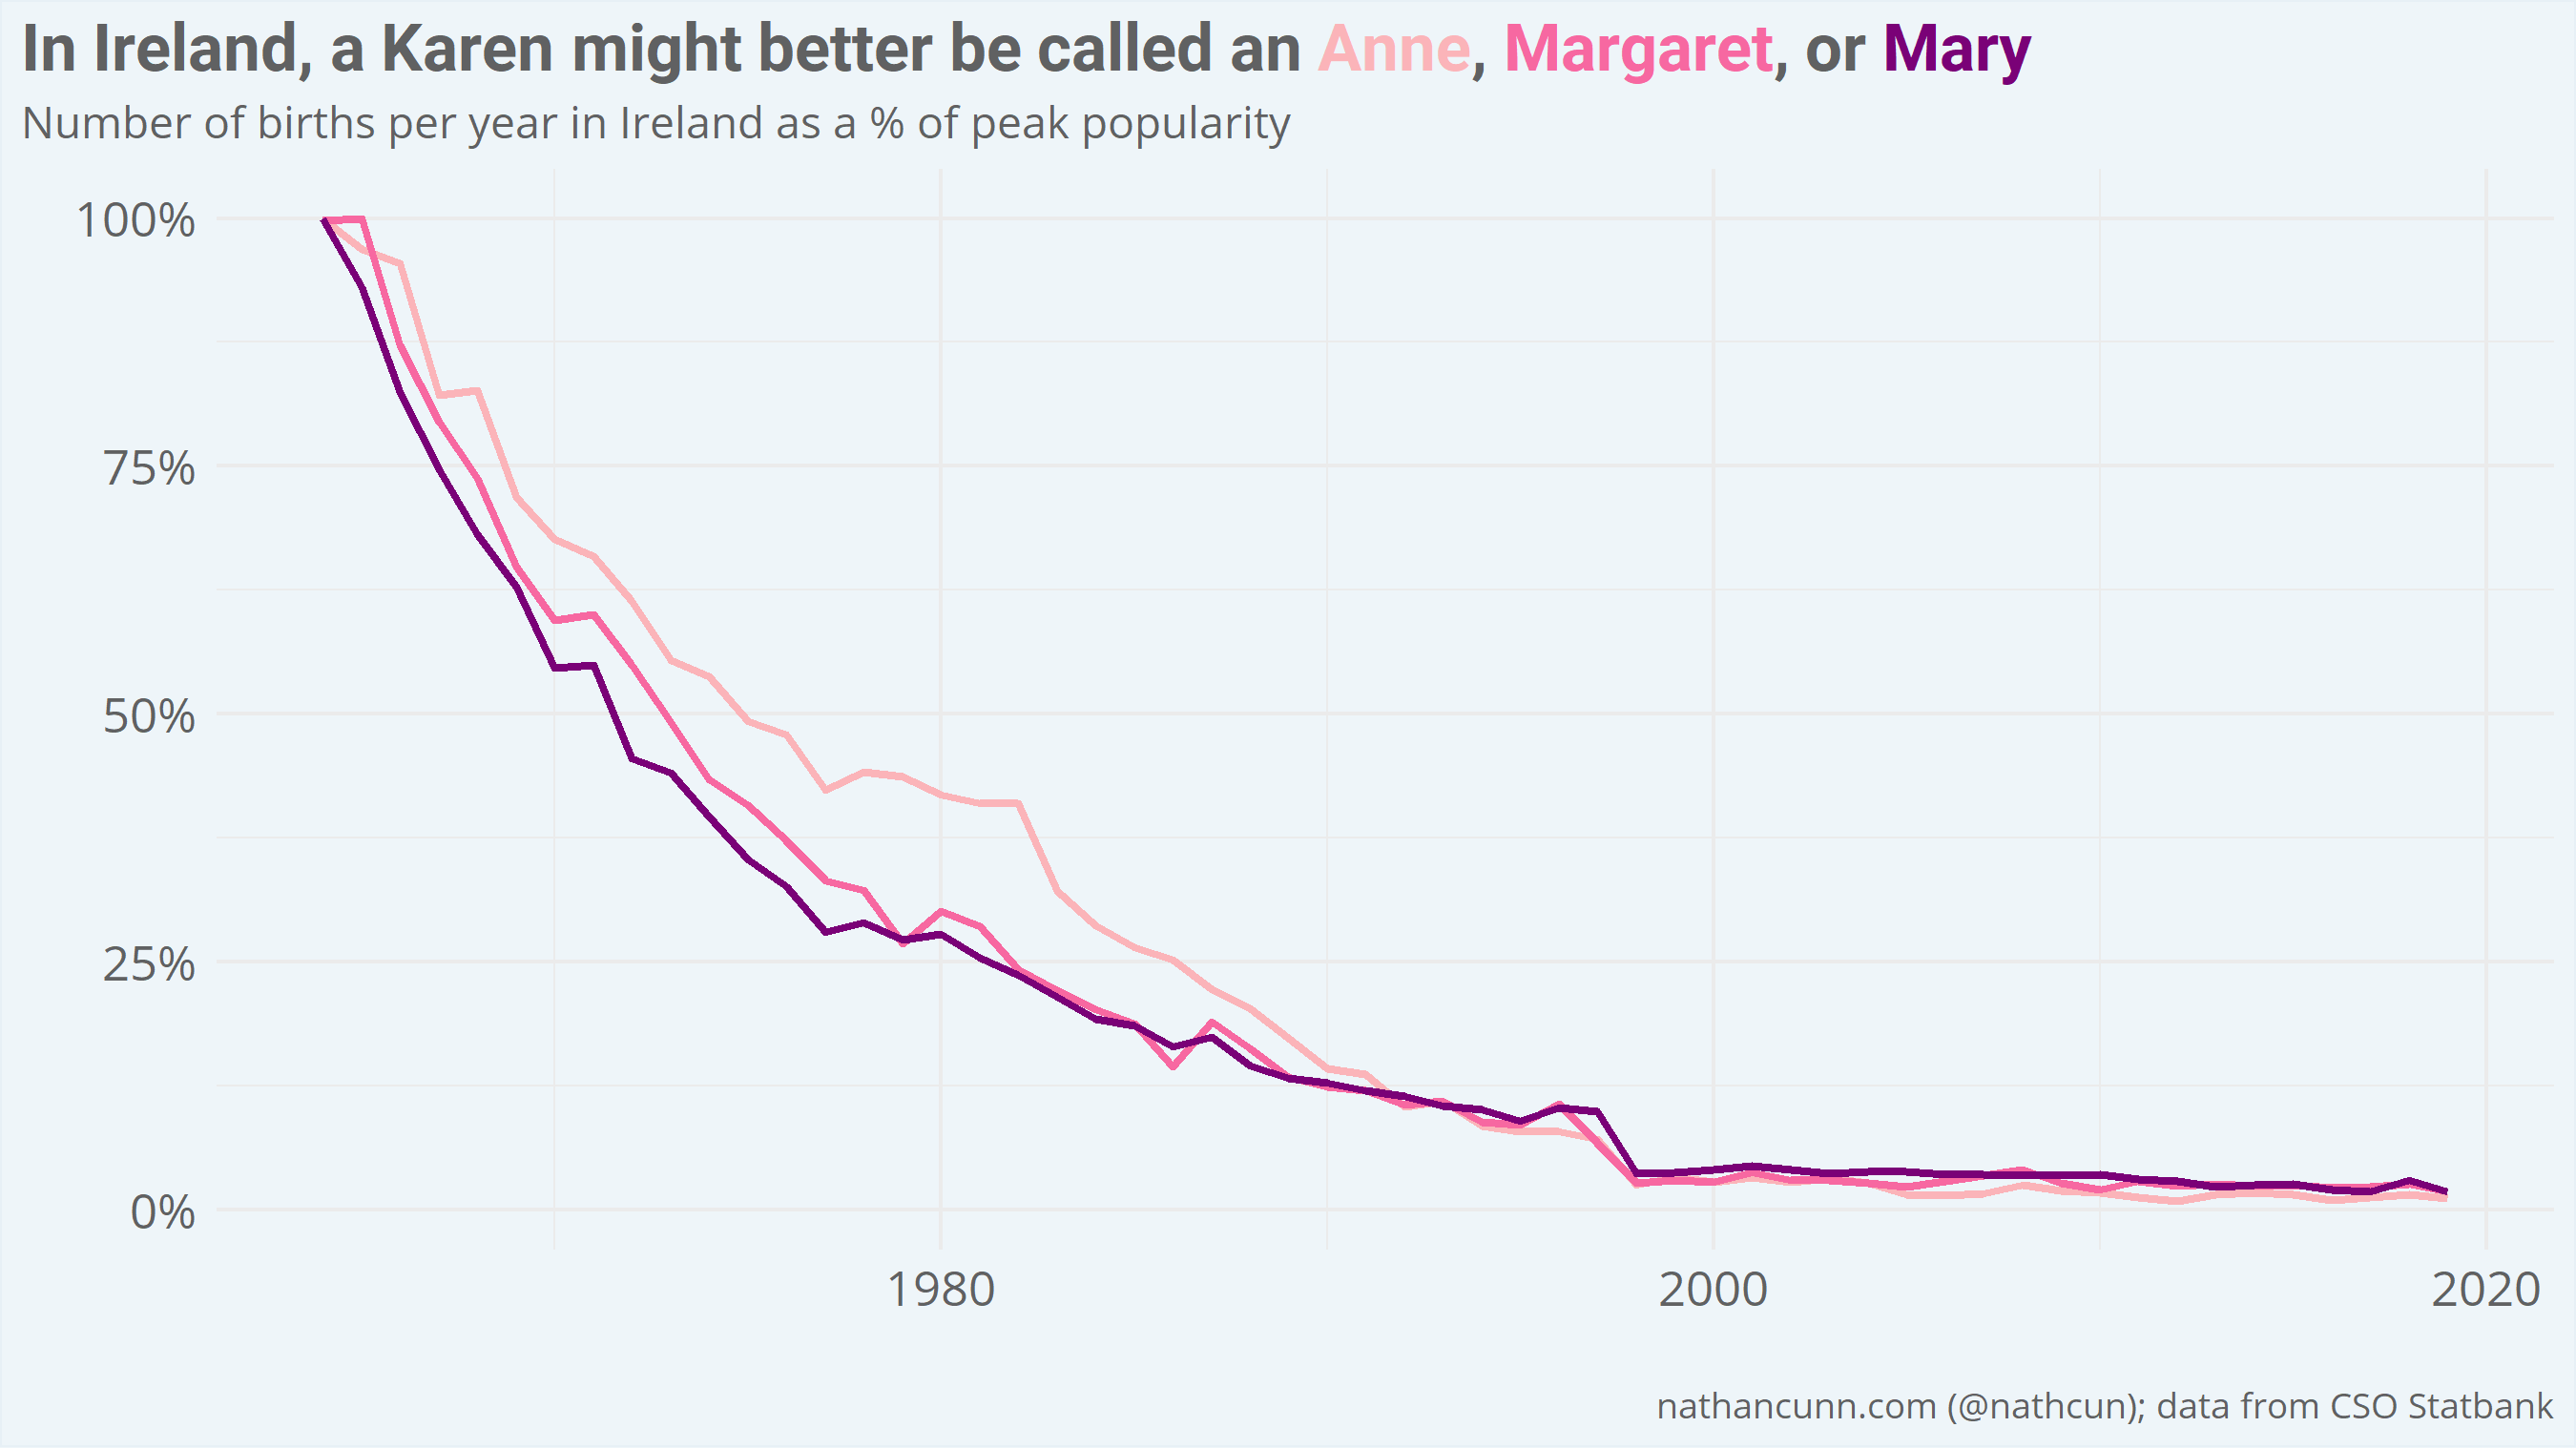 Line chart showing number of Annes, Margarets, and Marys born per year in Ireland, with a peak occurring in the early 1960s, and decline for all three names since.